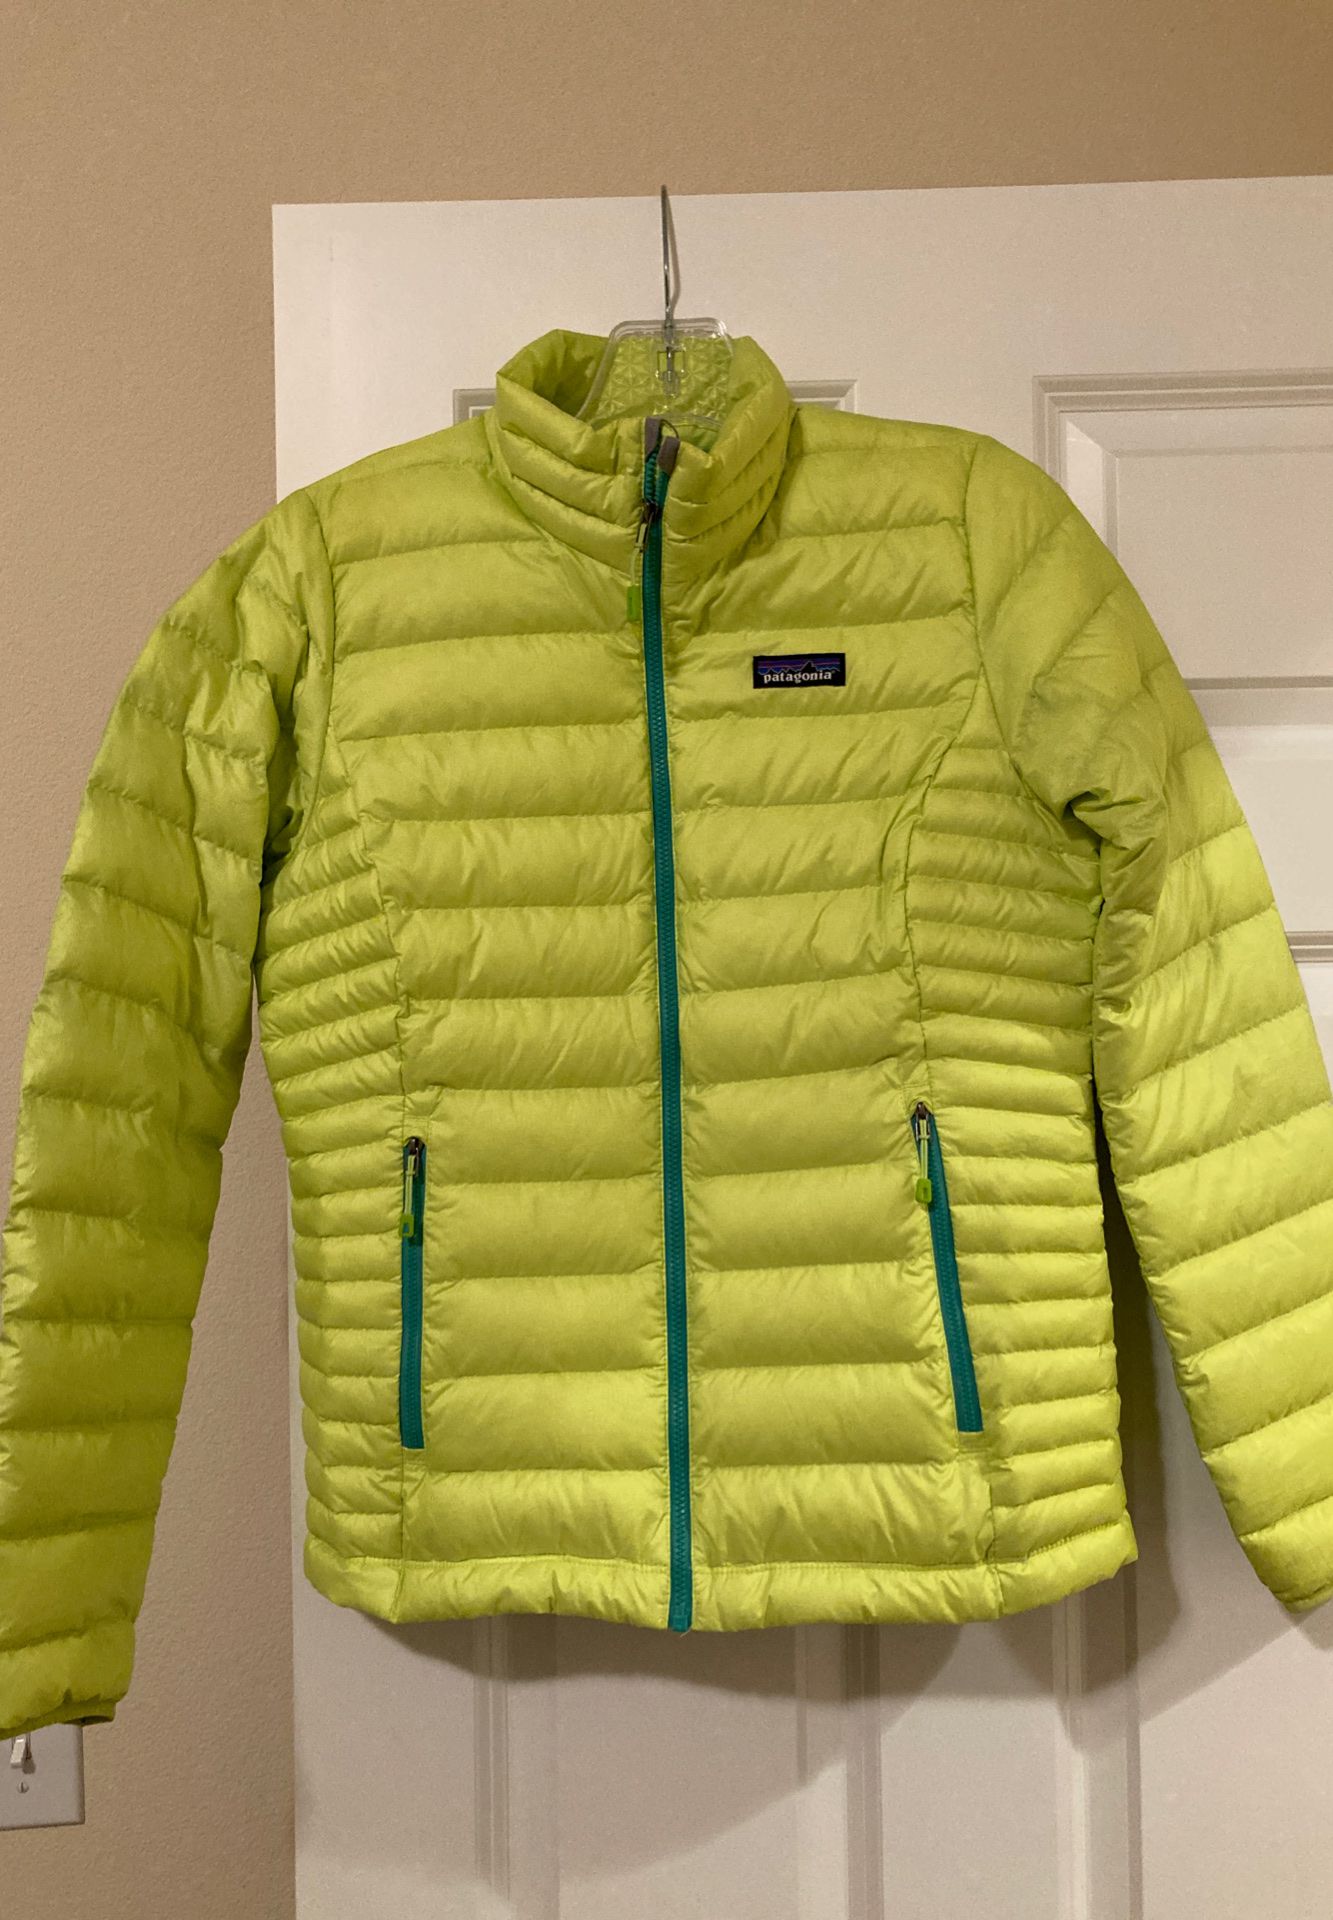 Patagonia Women’s Down Sweater Jacket Small